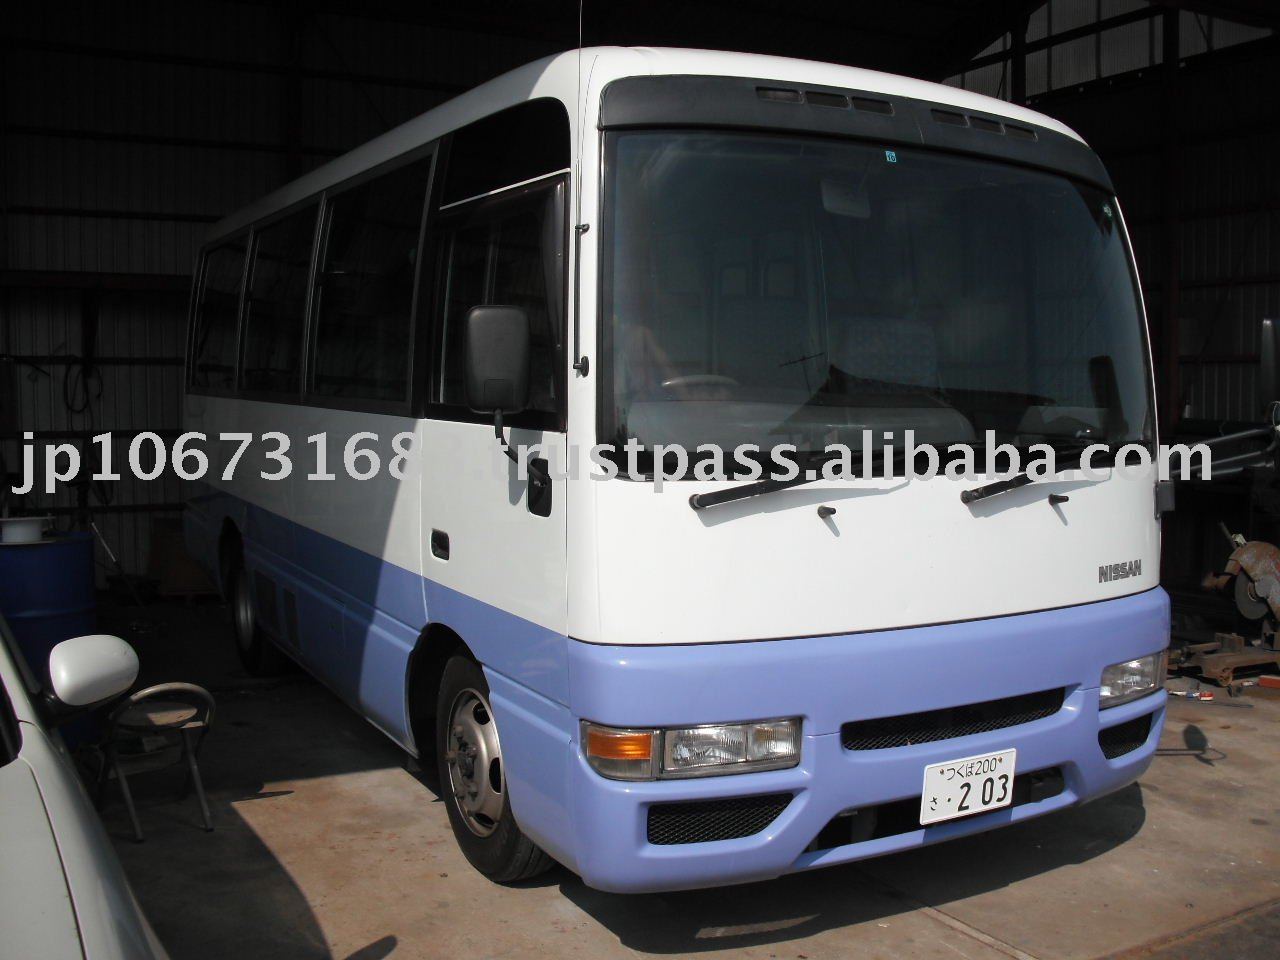 1999y Nissan Civilian coach from Japanese used bus